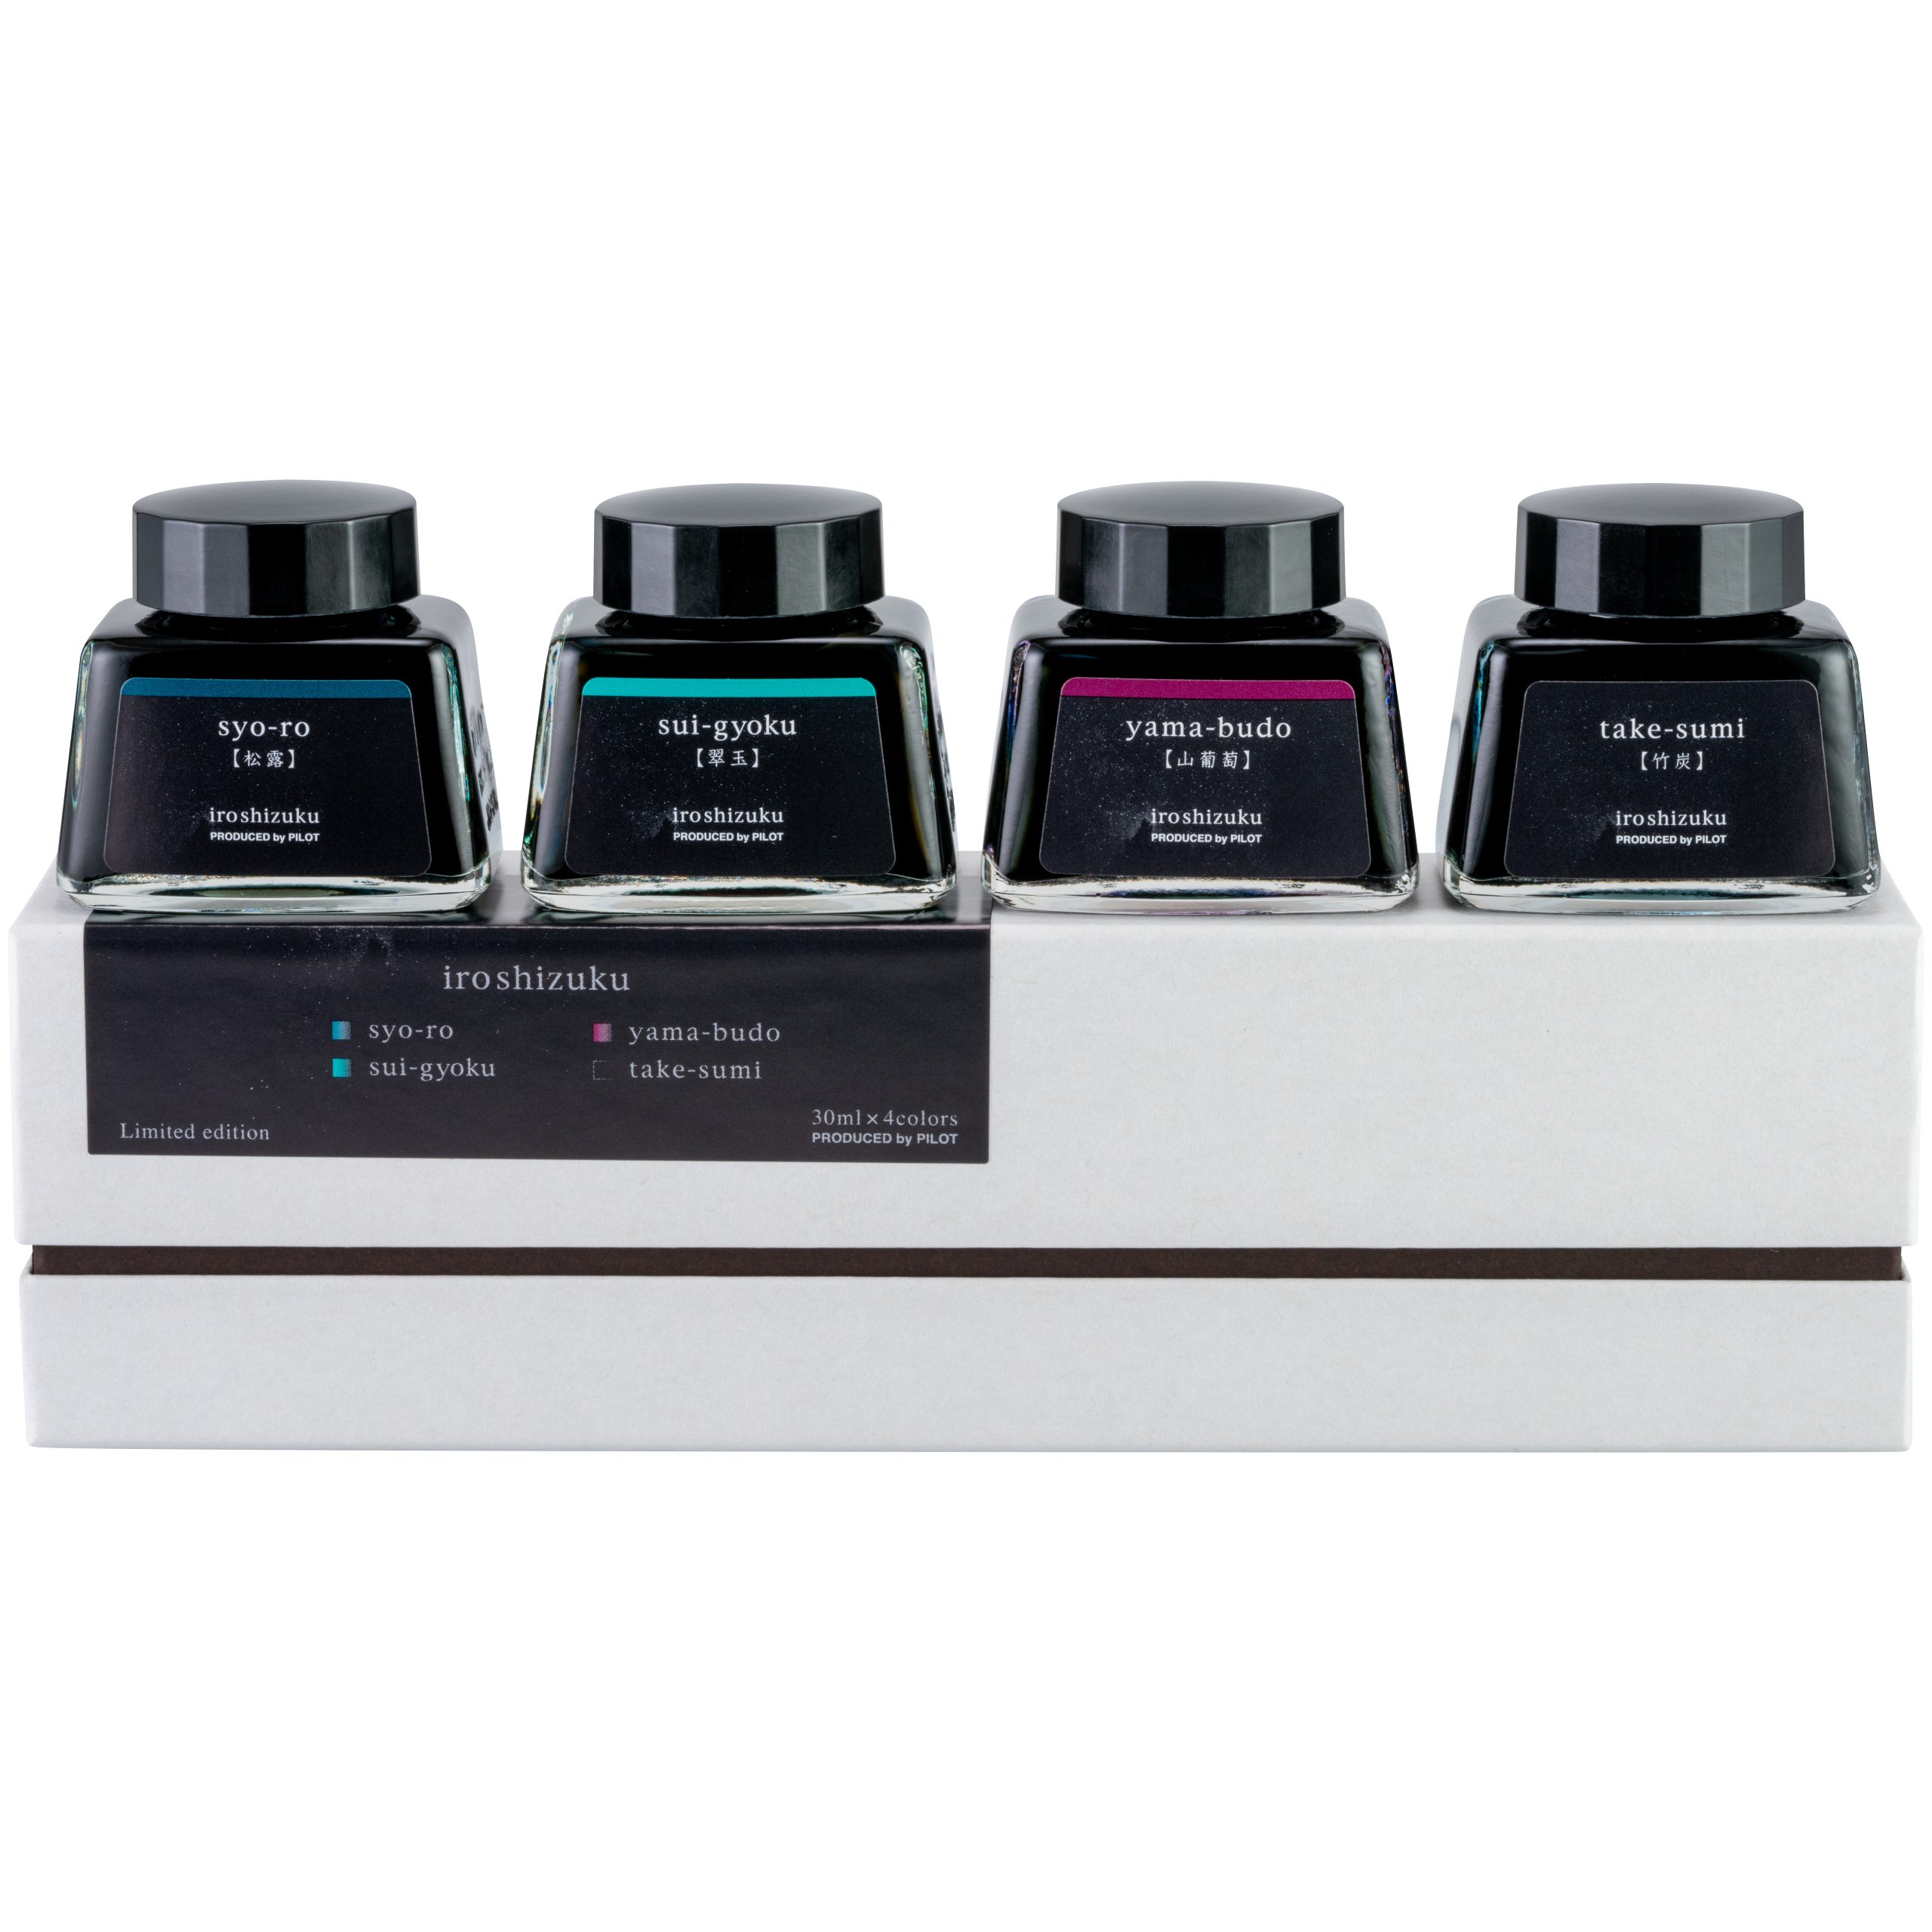 Pilot Iroshizuku Limited Edition Fountain Pen Ink Collection - Chatterley